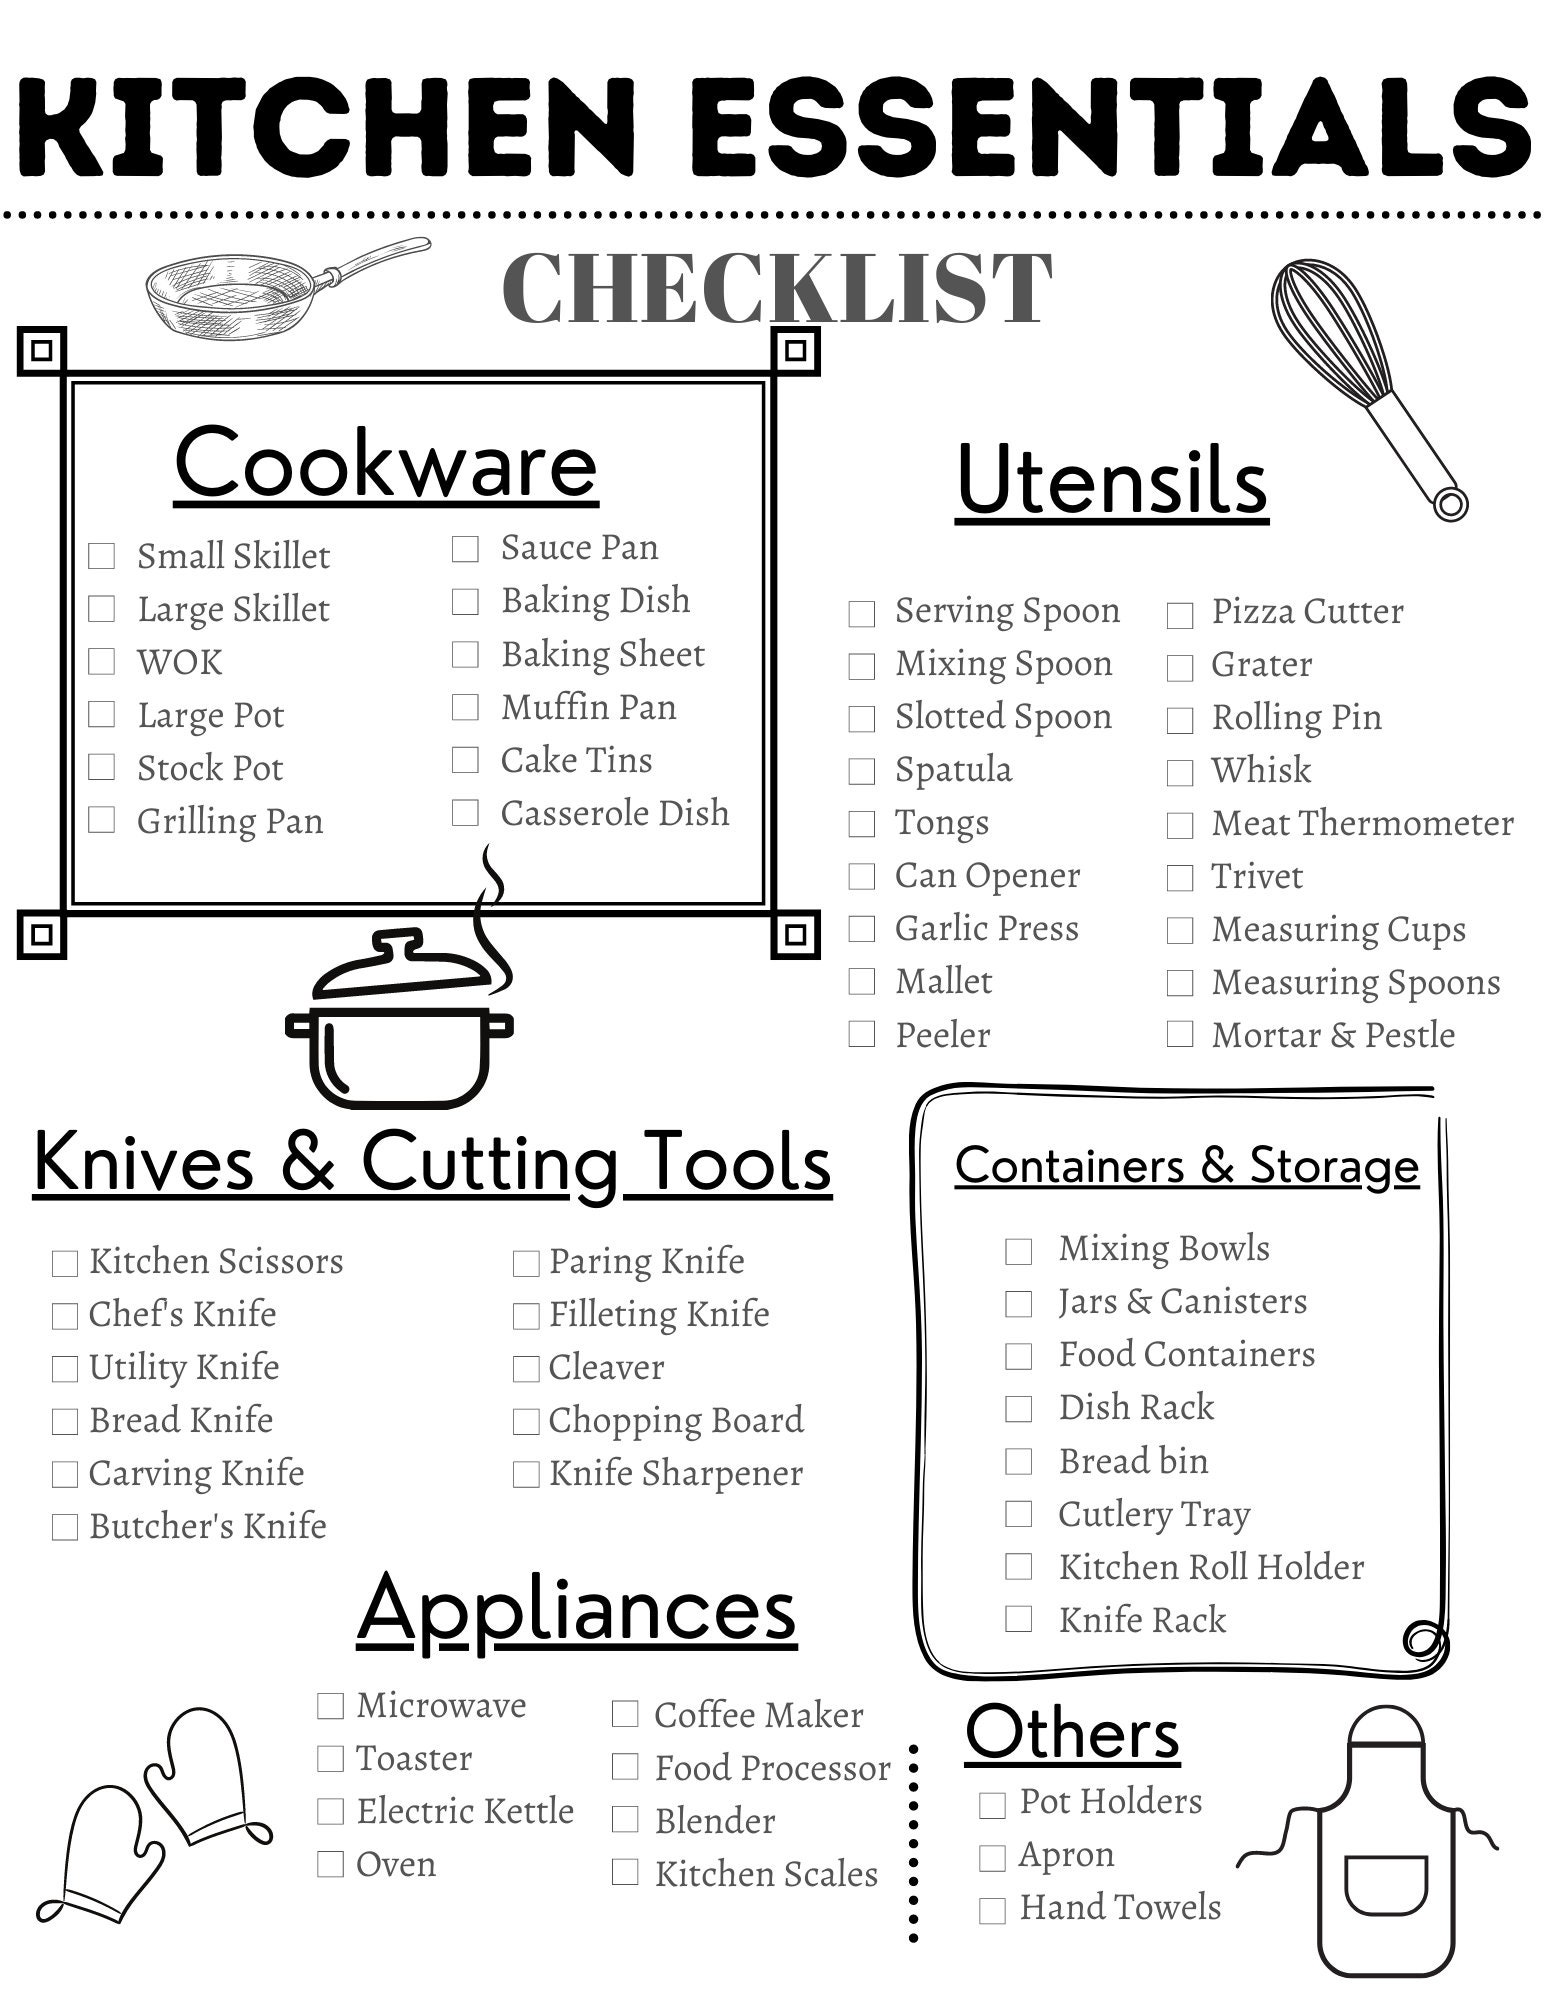 Baking essentials checklist: 25 tools recommended by BBC experts